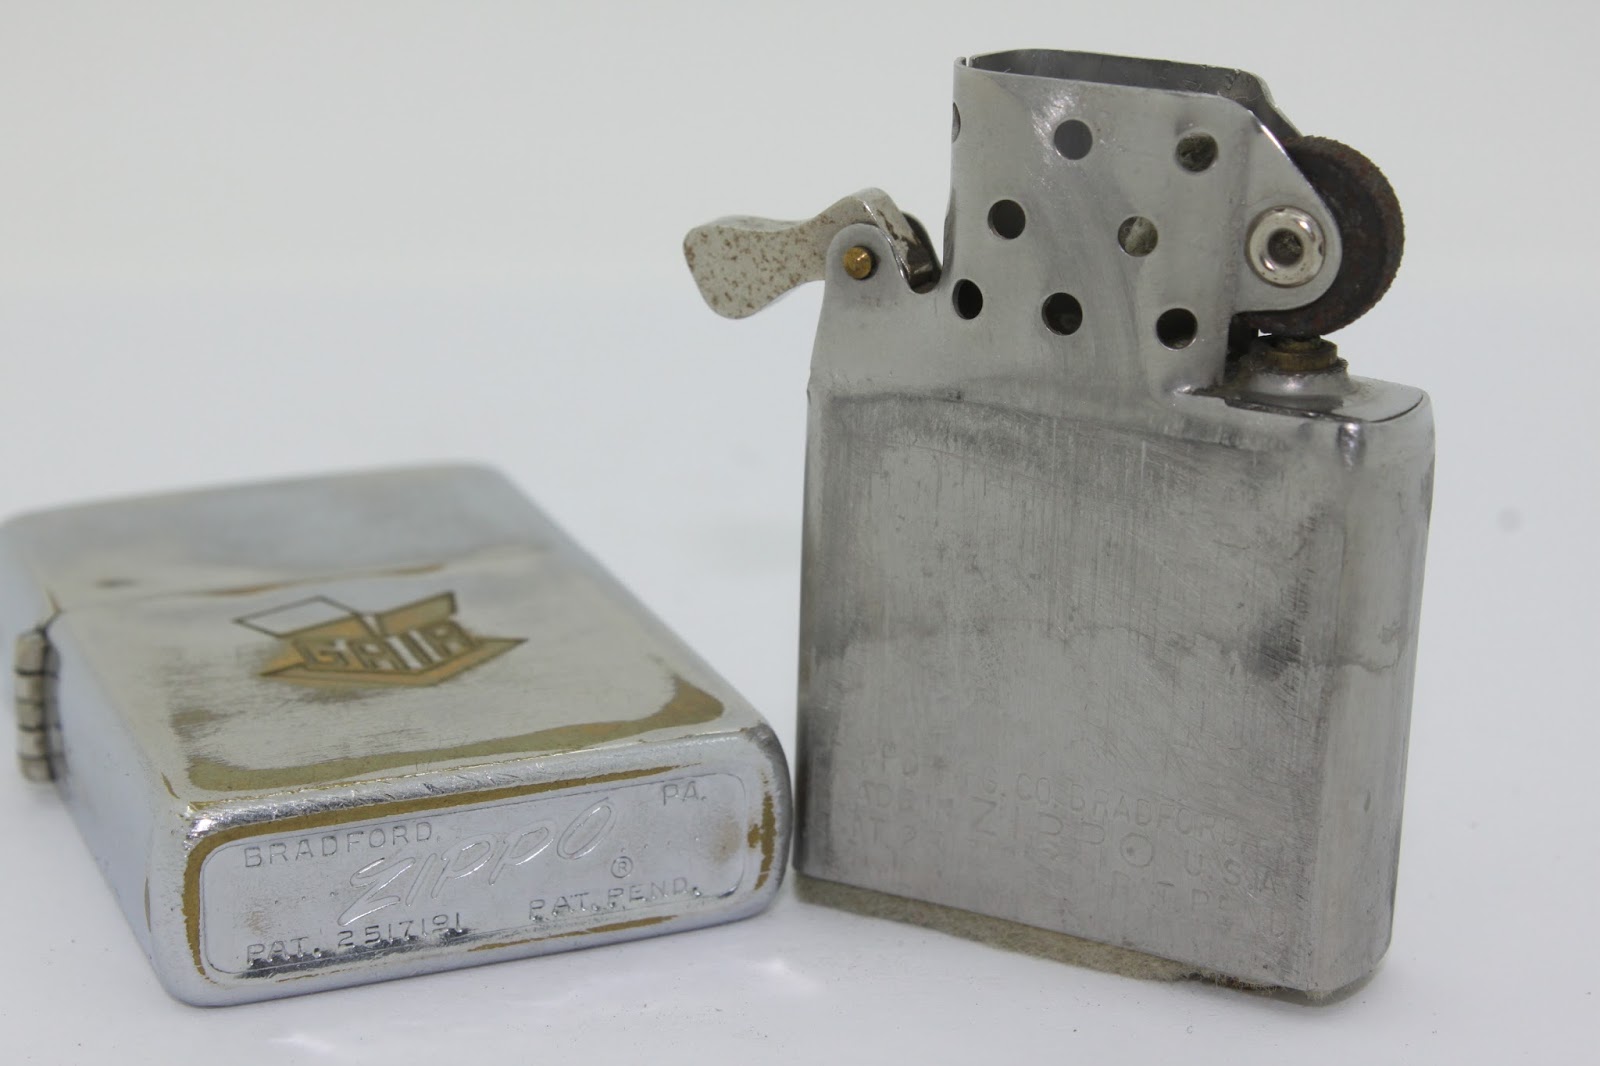 Shop the official zippo store for genuine zippo lighters. 